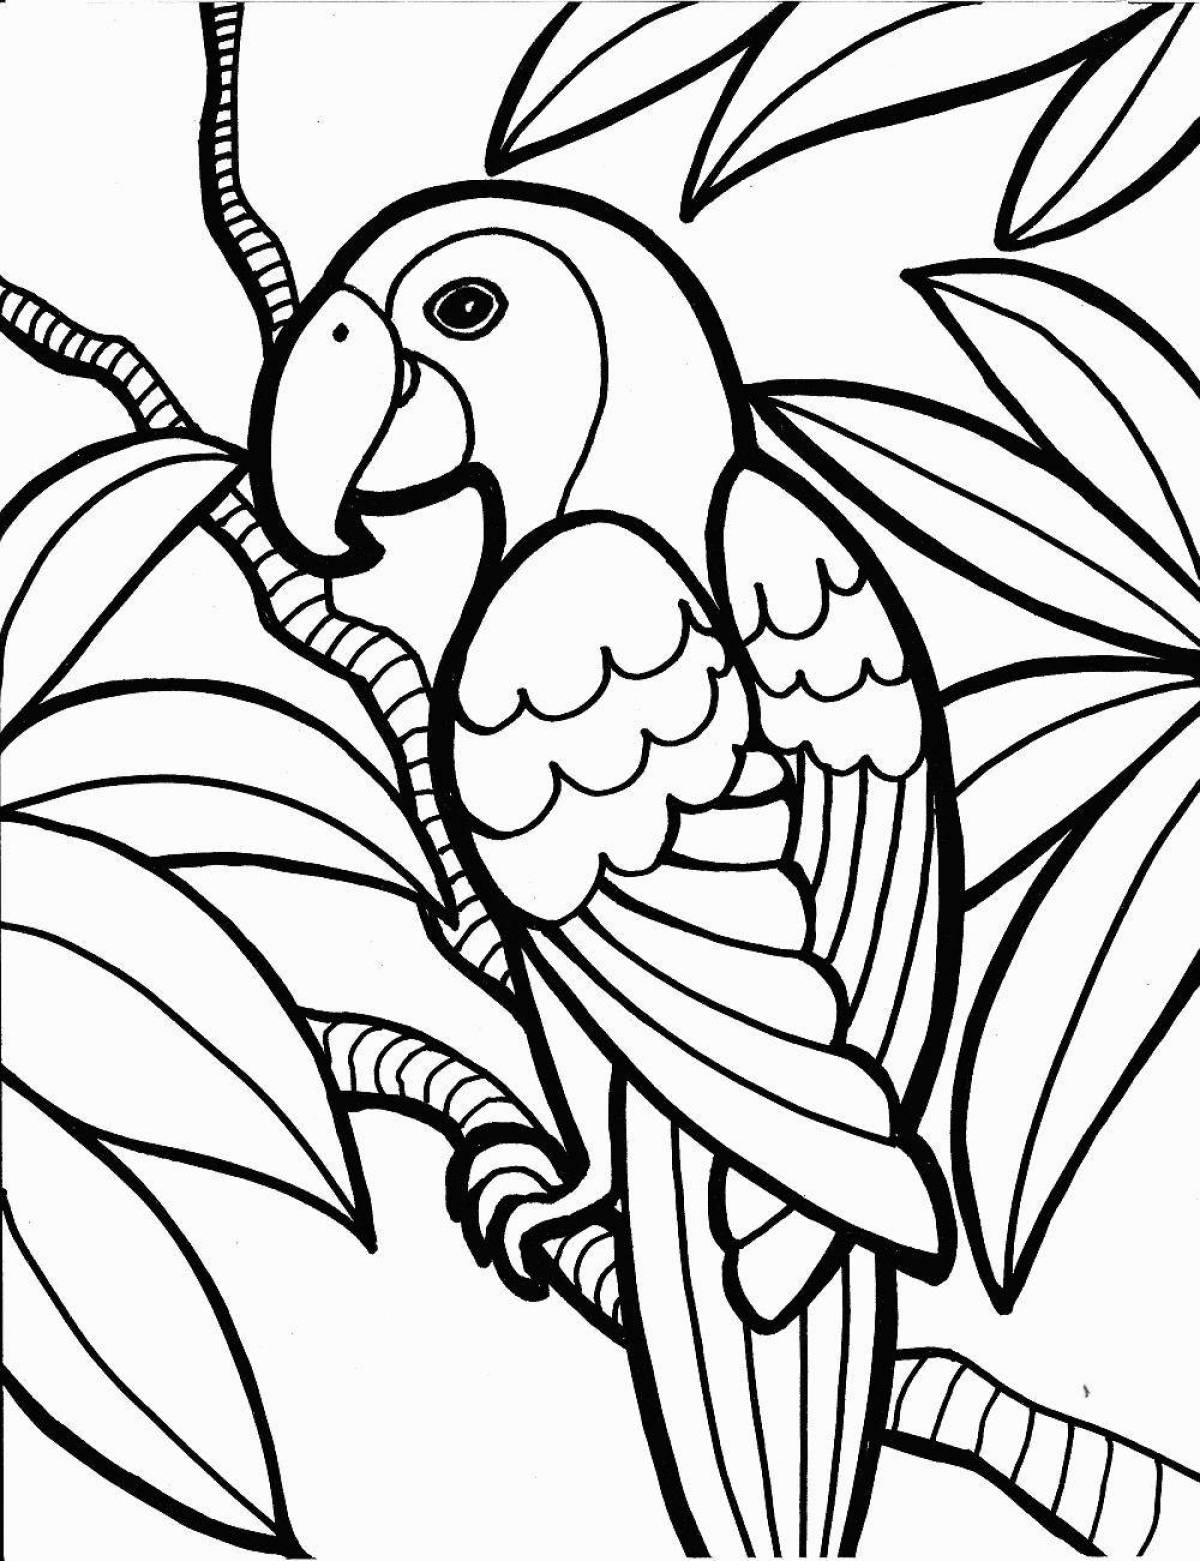 Adorable parrot coloring book for kids 6-7 years old